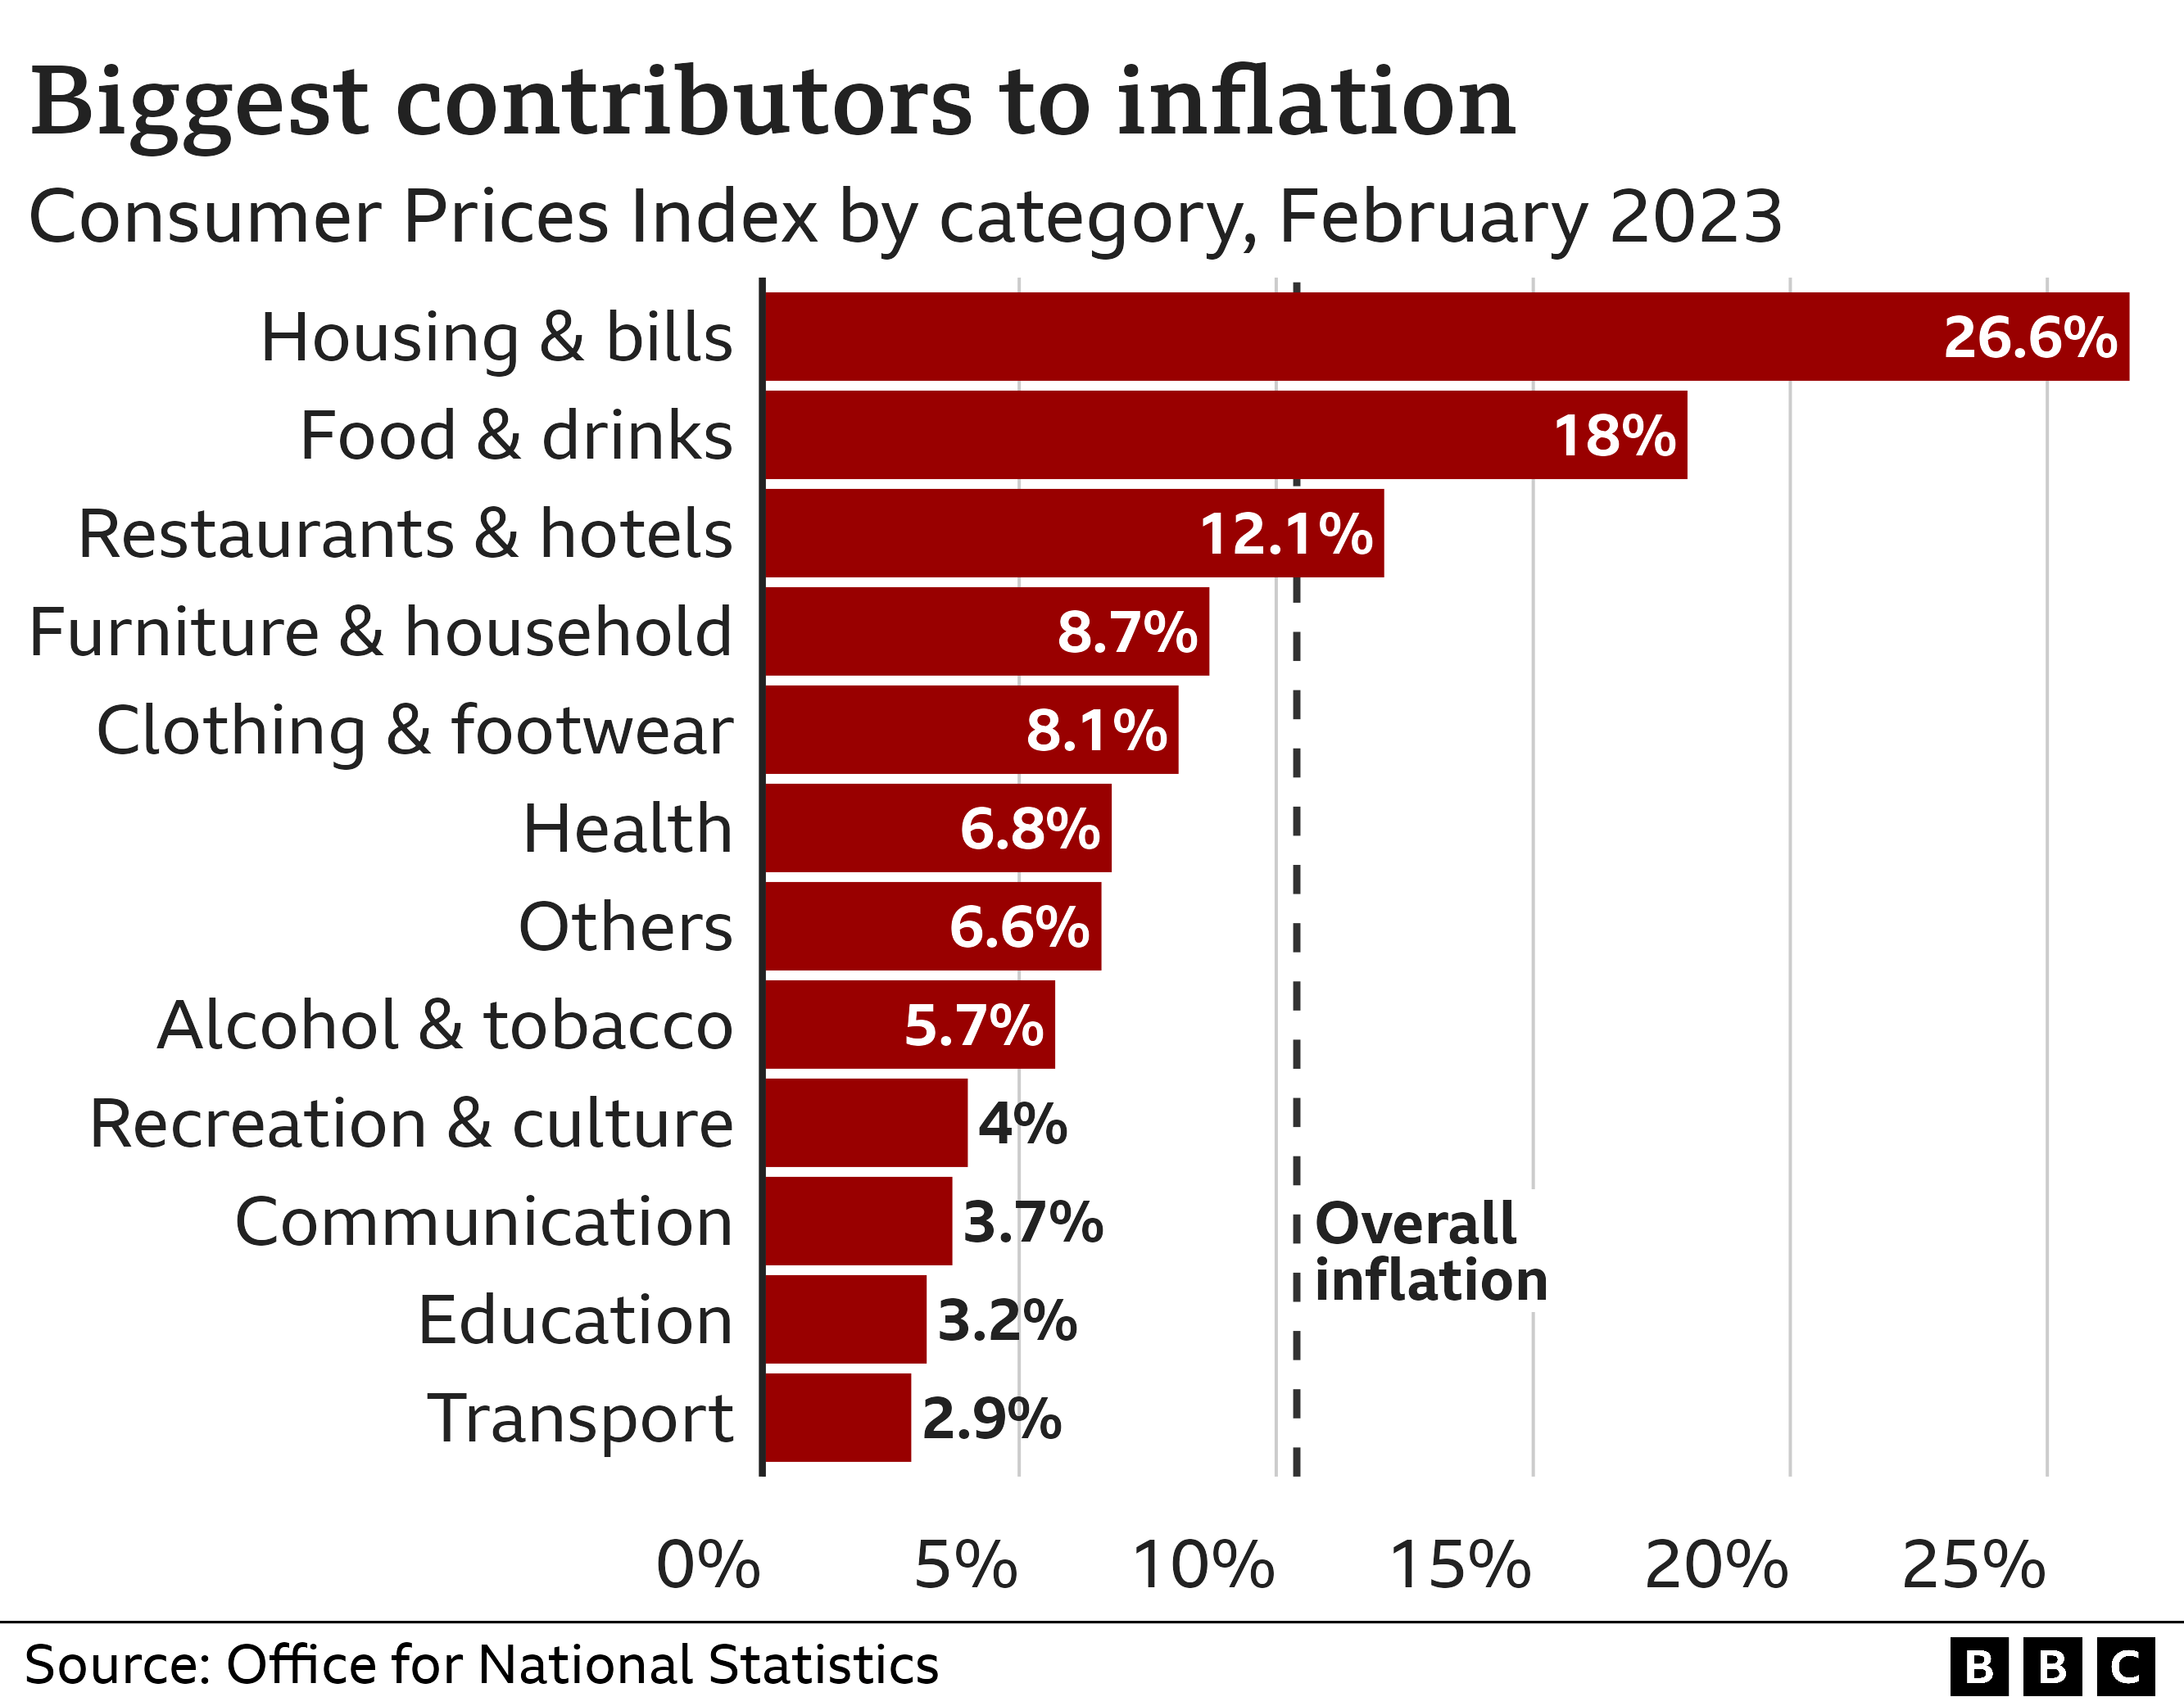 The main contributors to inflation